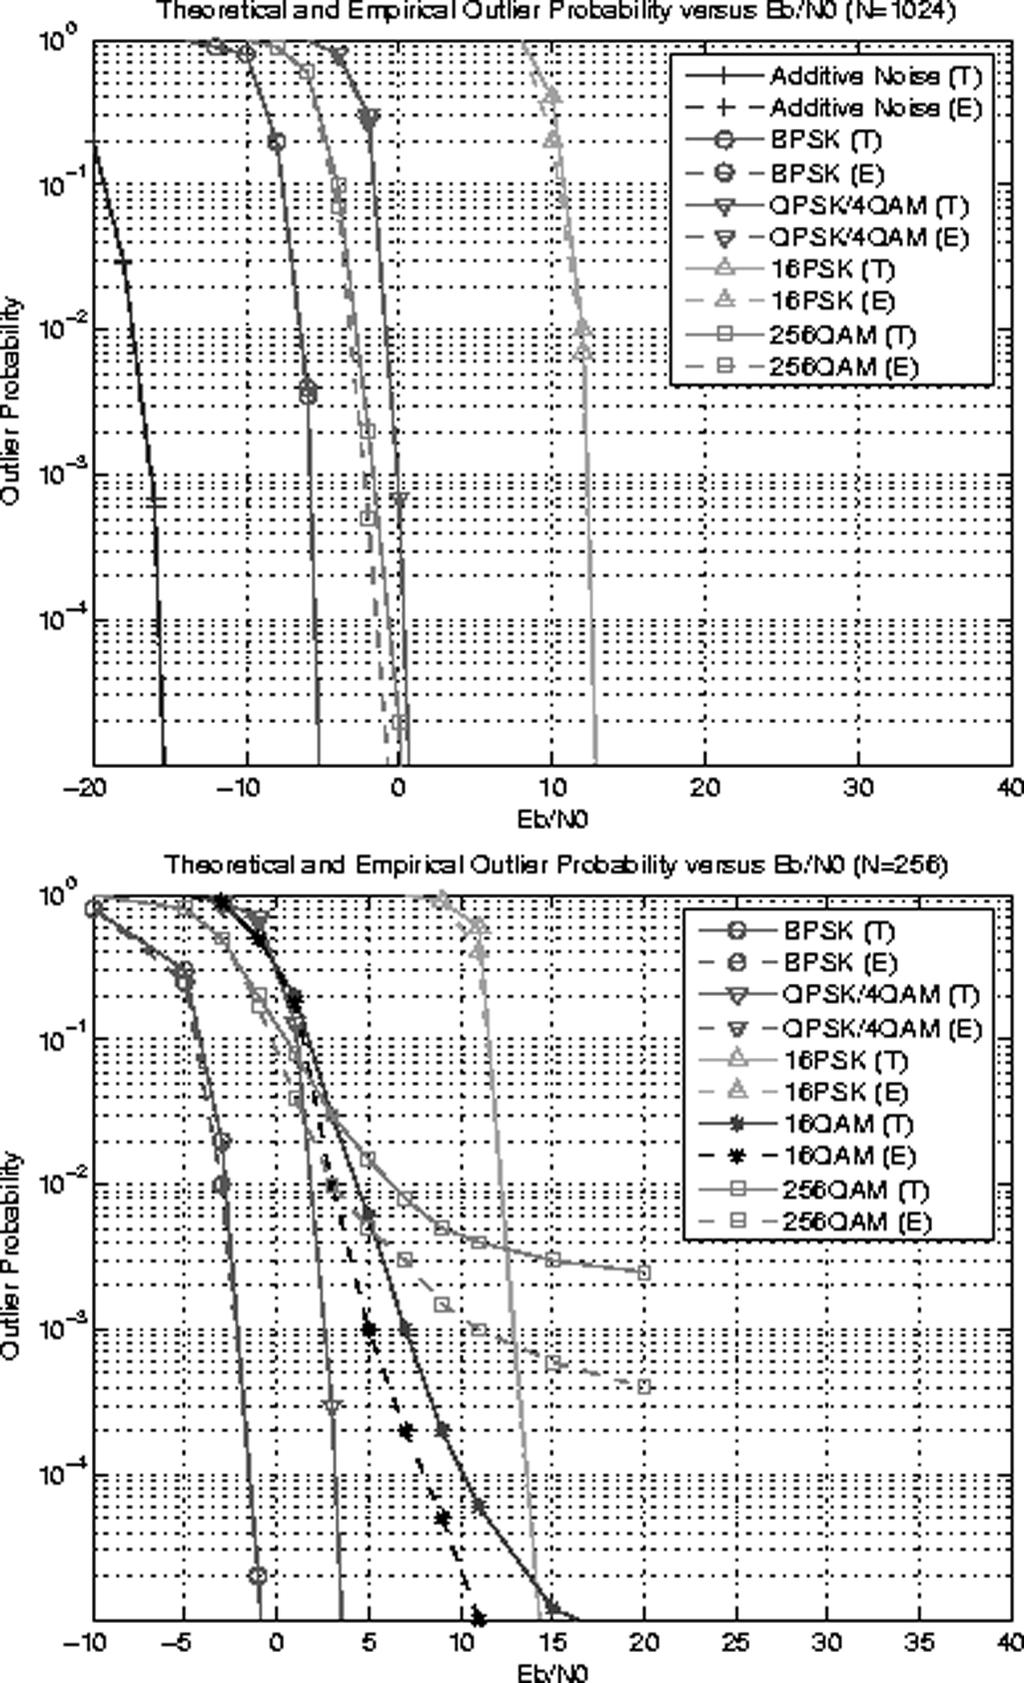 1728 IEEE TRANSACTIONS ON COMMUNICATIONS, VOL. 54, NO. 10, OCTOBER 2006 Fig. 1. Theoretical empirical outlier probability versus E =N (top: N = 1024; bottom: N =256). Fig. 2. Theoretical empirical outlier probability versus N (top: E =N = 5 db; bottom: E =N = 20 db).